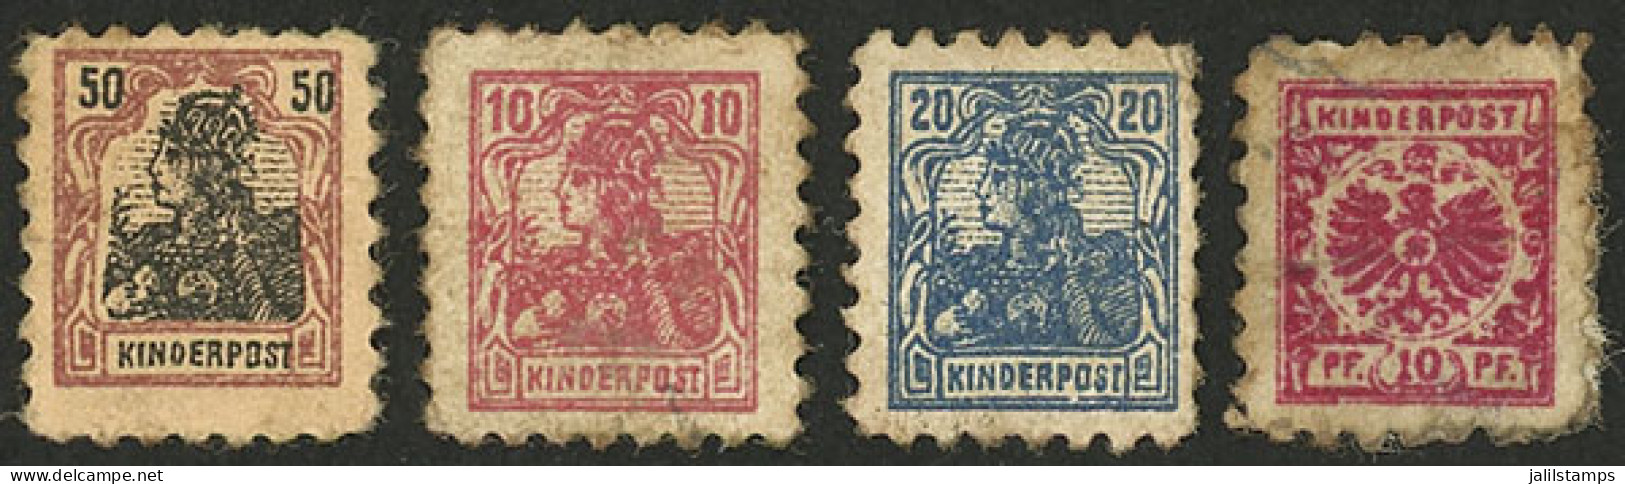 GERMANY: KINDERPOST: 4 Very Small Stamps, Minor Defects, Very Interesting! - Erinnofilia